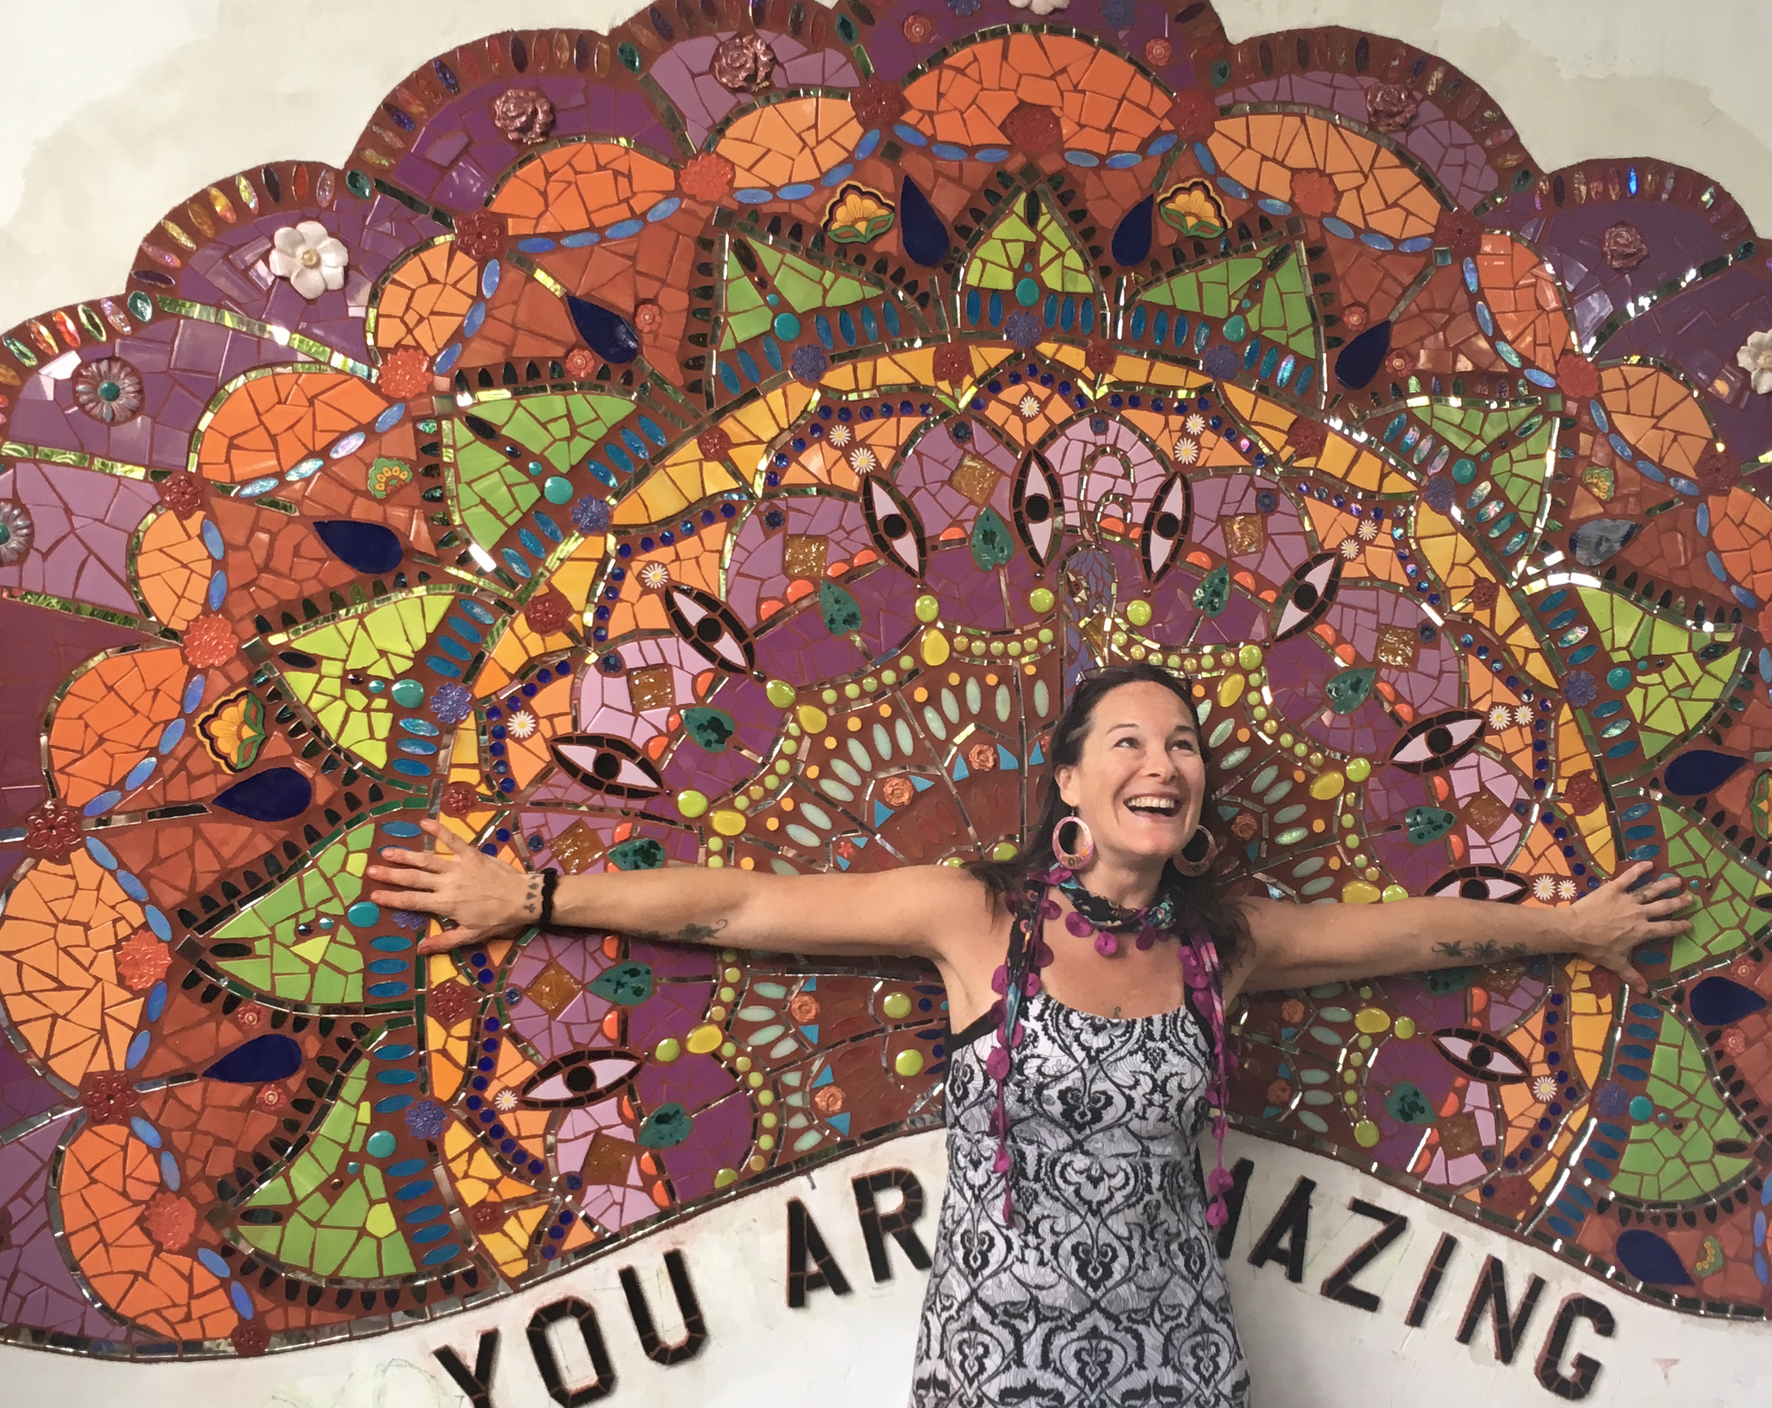 Laurel True in front of &quot;You are Amazing&quot; mosaic mural